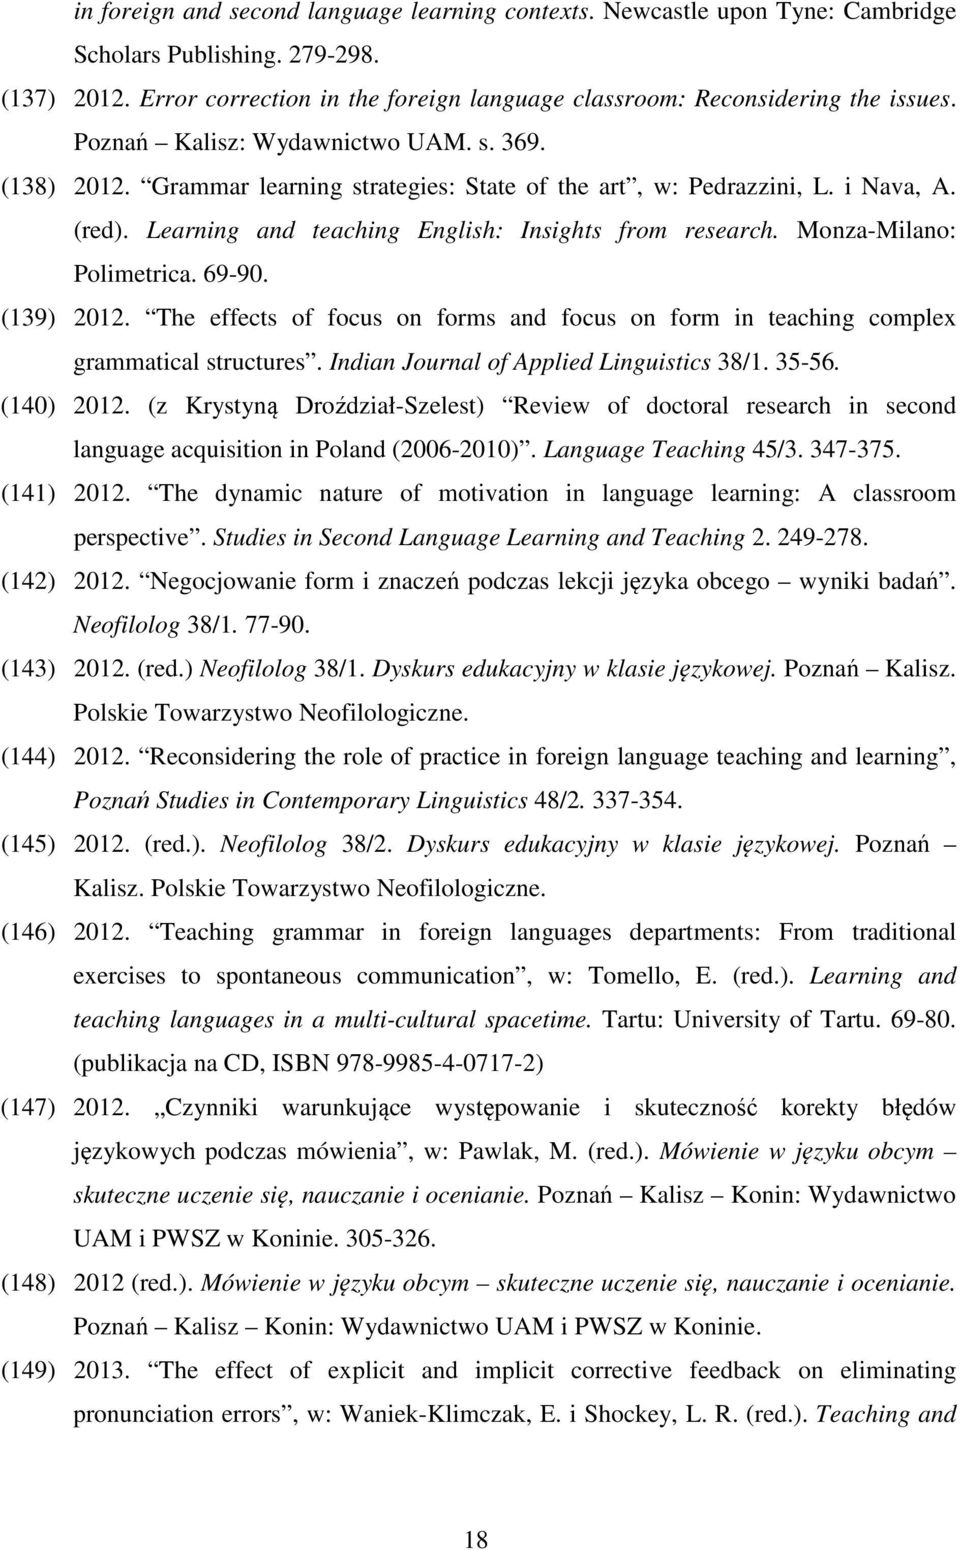 Monza-Milano: Polimetrica. 69-90. (139) 2012. The effects of focus on forms and focus on form in teaching complex grammatical structures. Indian Journal of Applied Linguistics 38/1. 35-56. (140) 2012.